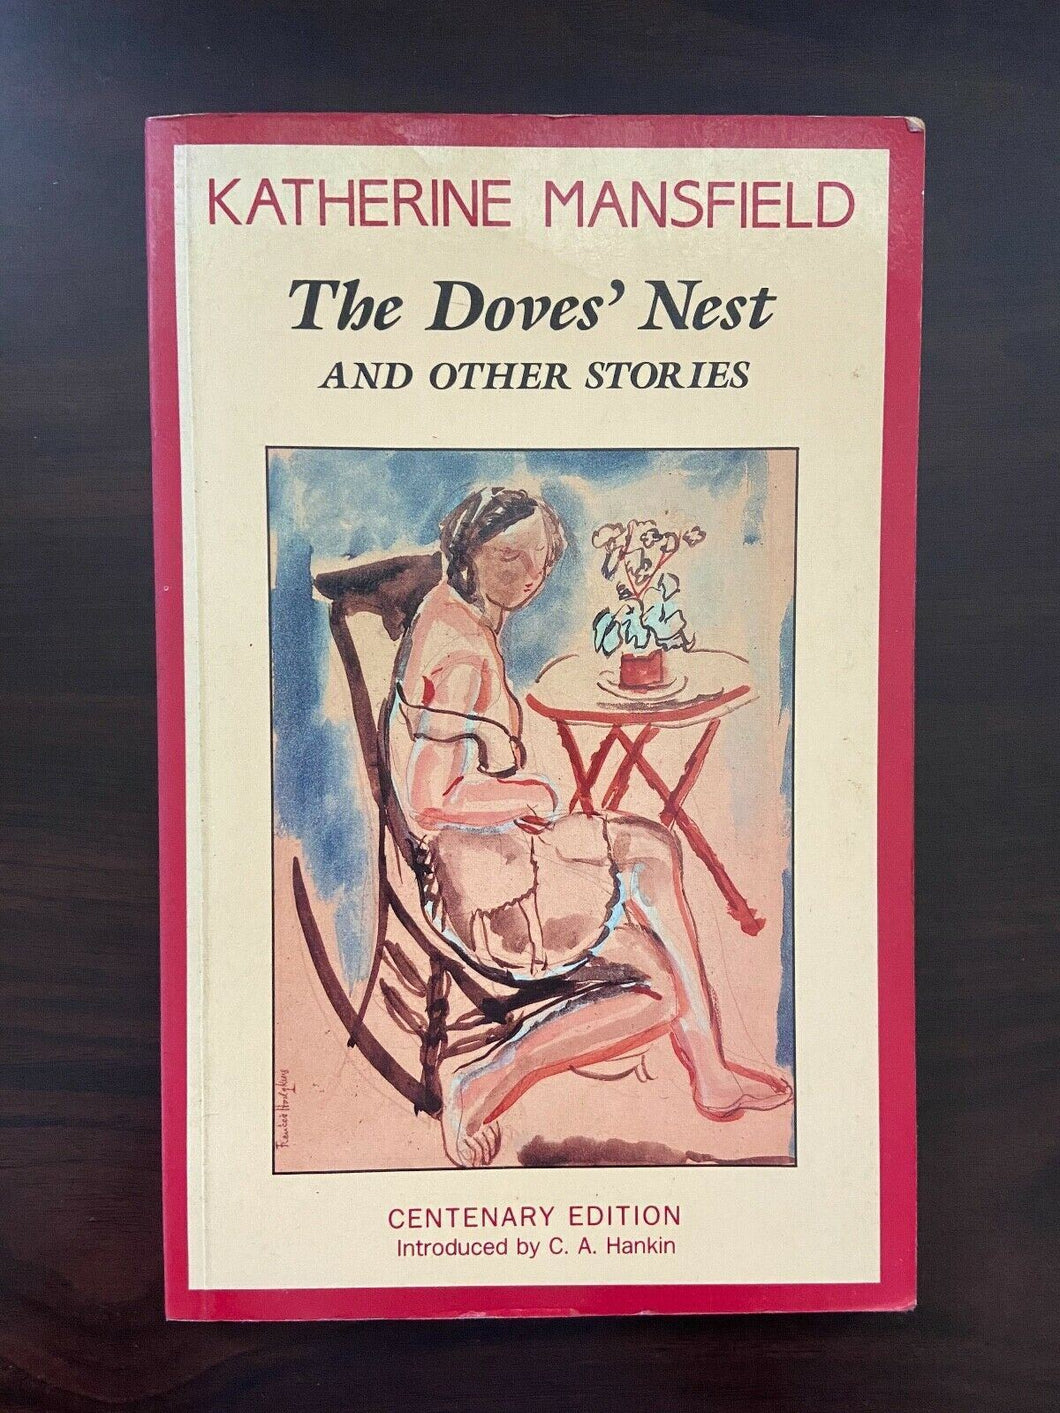 The Dove's Nest and Other Stories by Katherine Mansfield (Paperback, 1988)